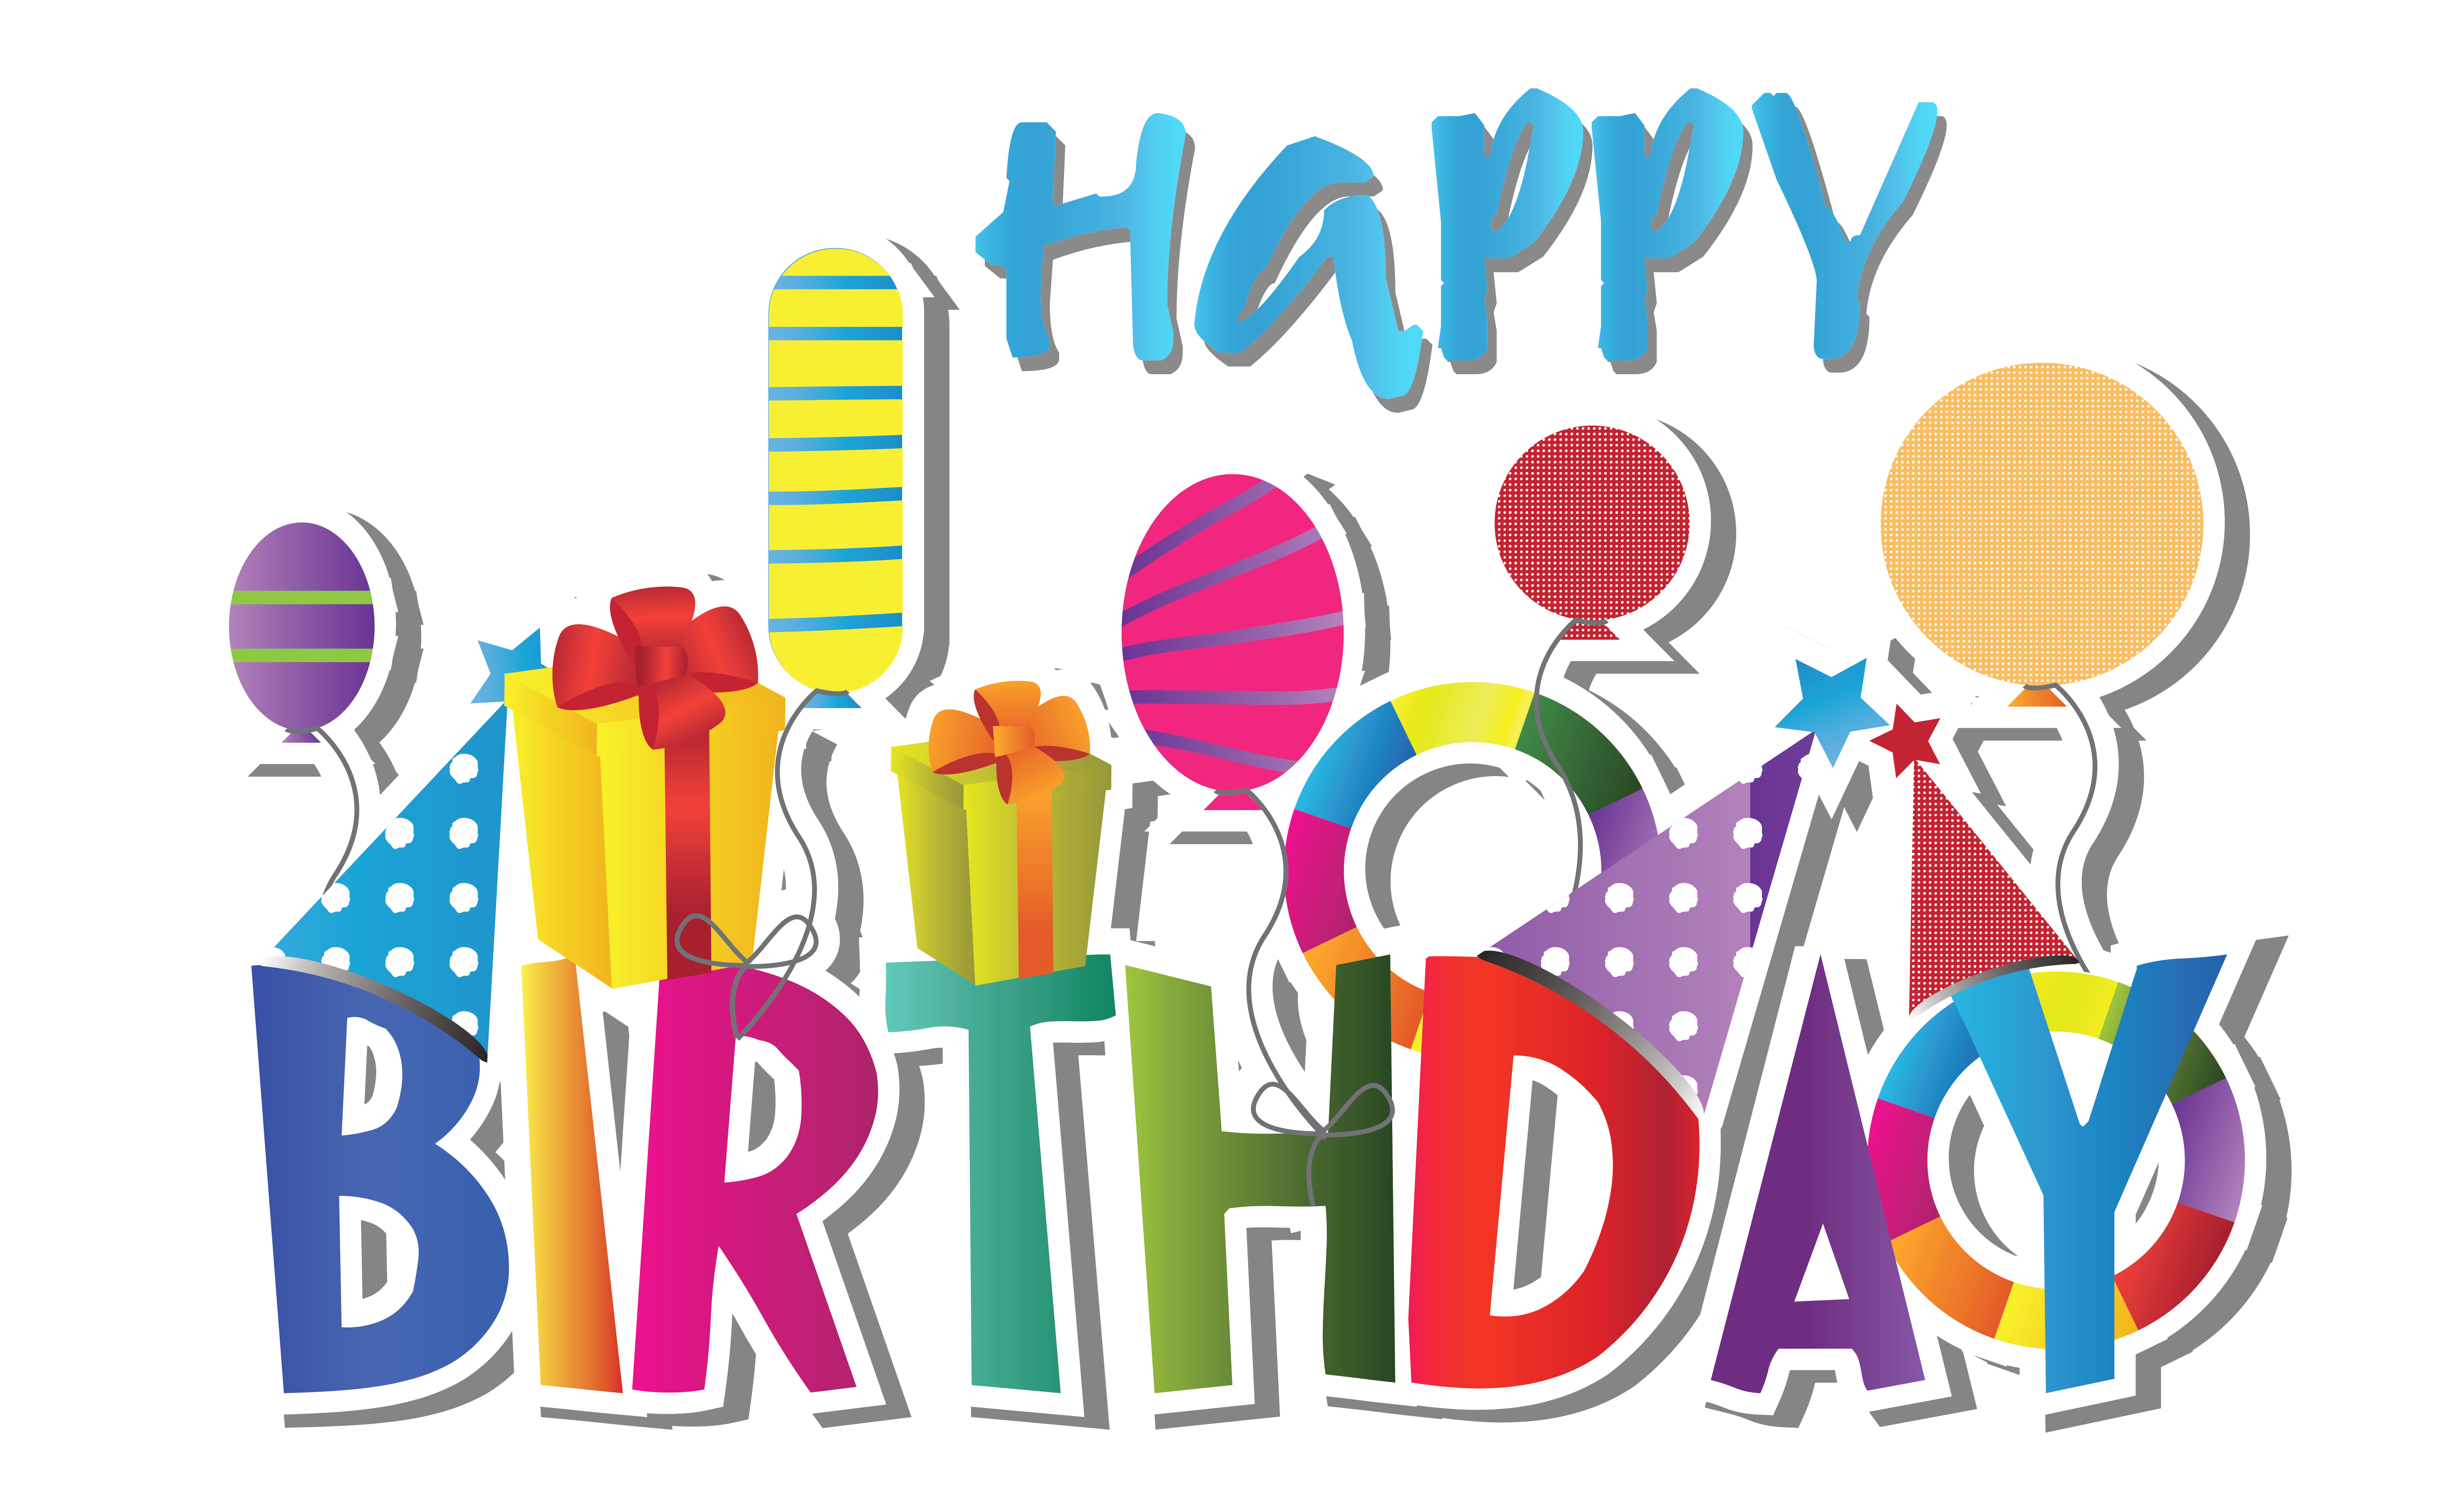 Freeware Clipart Happy Birthday and other clipart images on Cliparts pub ™.